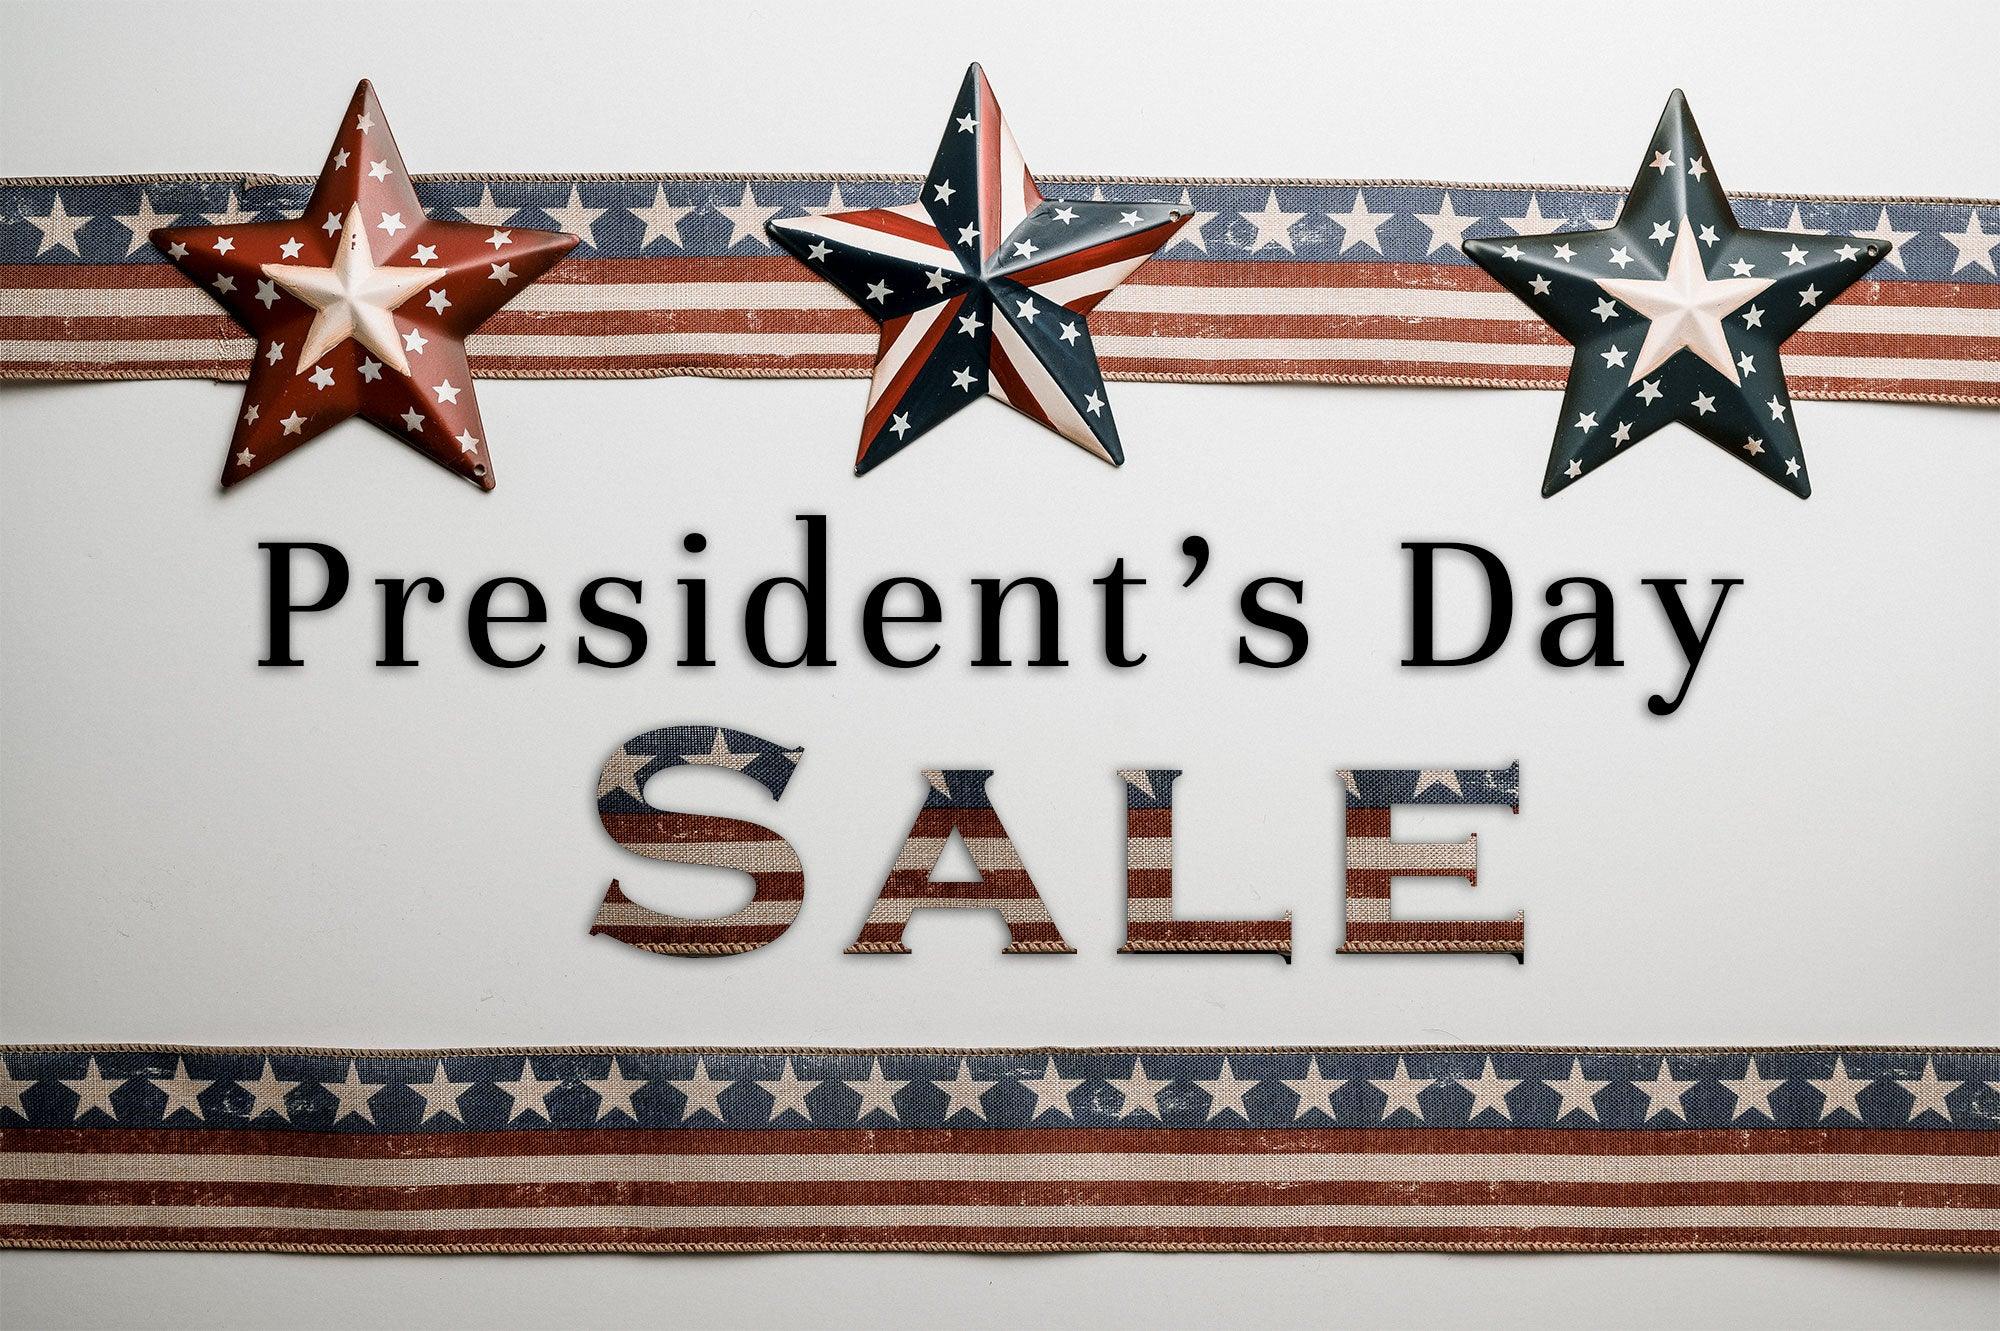 Lee Display's President's Day Sale for Holiday Decorations and Home Decor Discounts